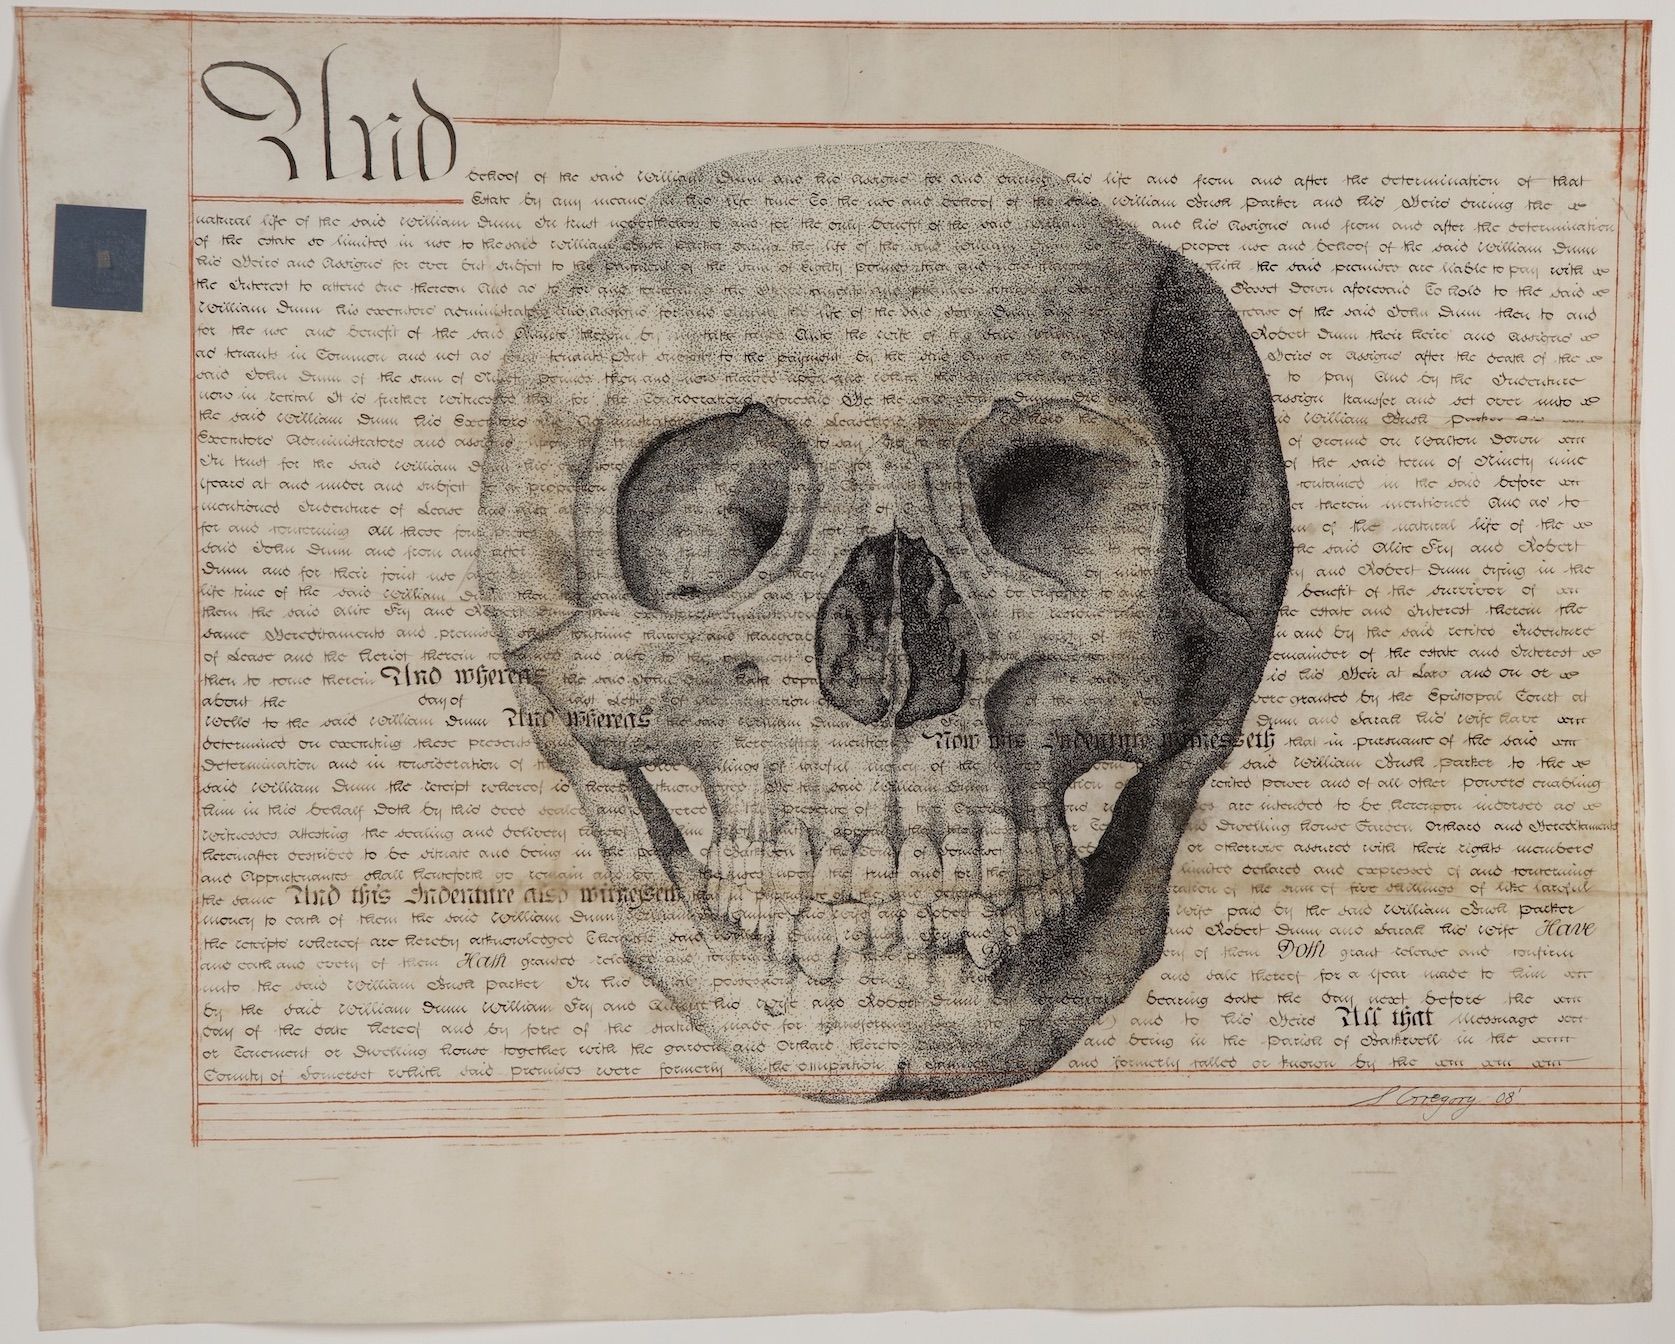 Steven Gregory, (b.1952), School of the Said William, 2008, pen and ink on conserved antique vellum document, 59 x 73 cm.